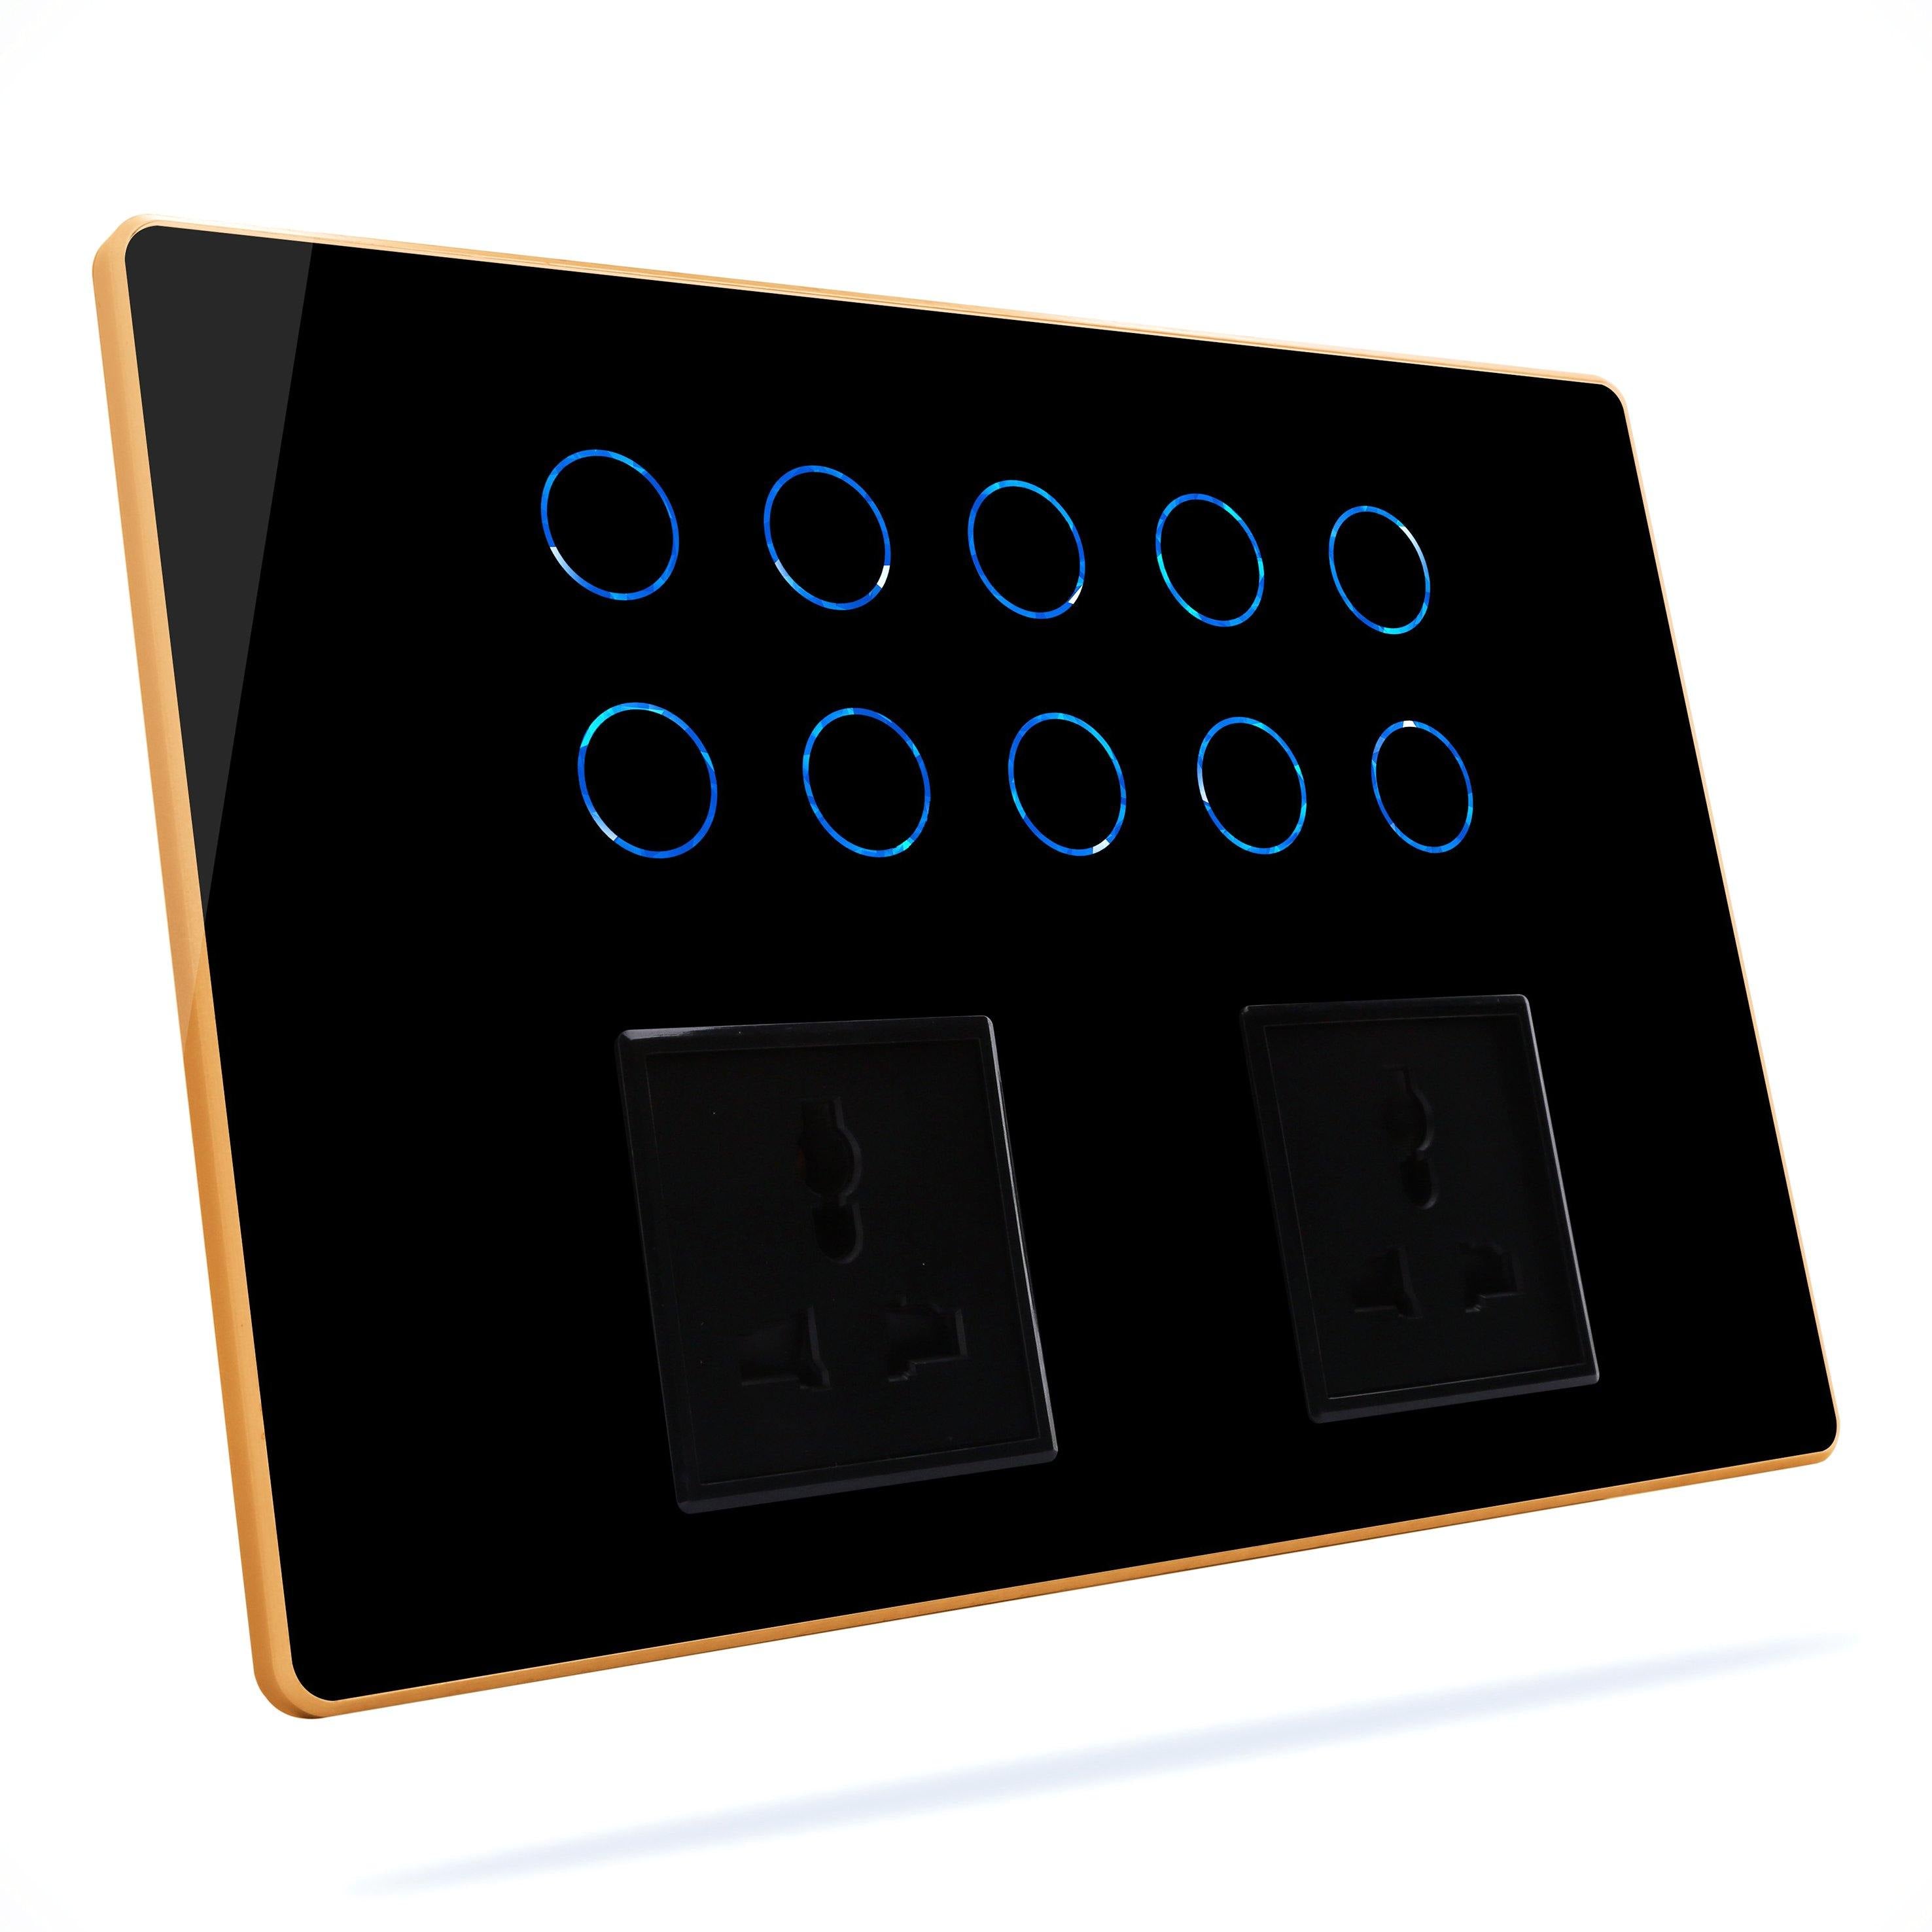 HOGAR SMART 10+2 TOUCH SWITCHES PANELS WITH BUILT-IN AUTOMATION - Ankur Lighting